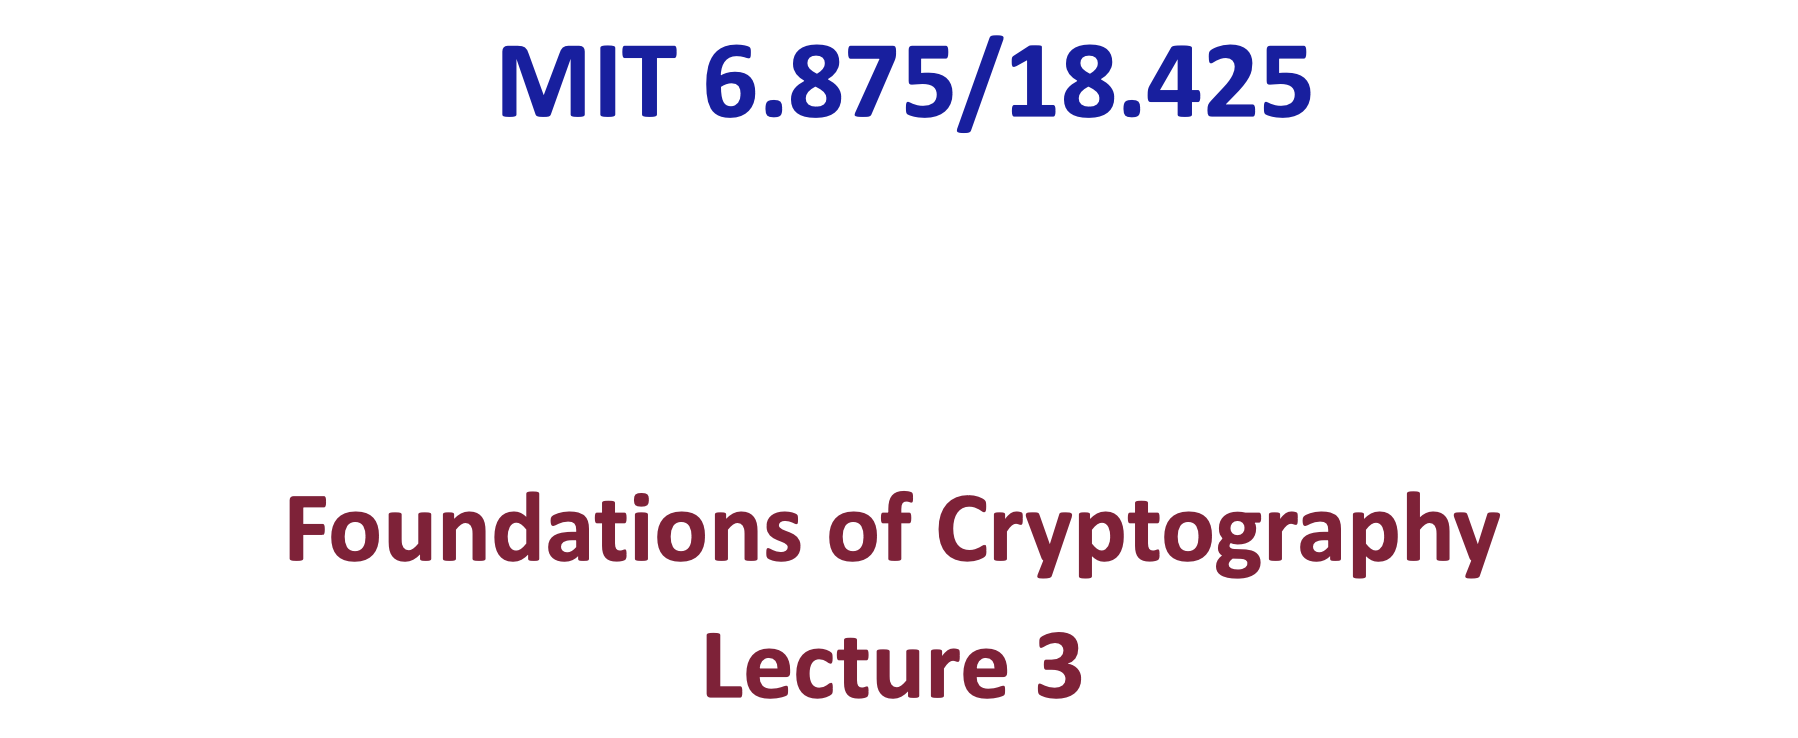 「Cryptography-MIT6875」: Lecture 3